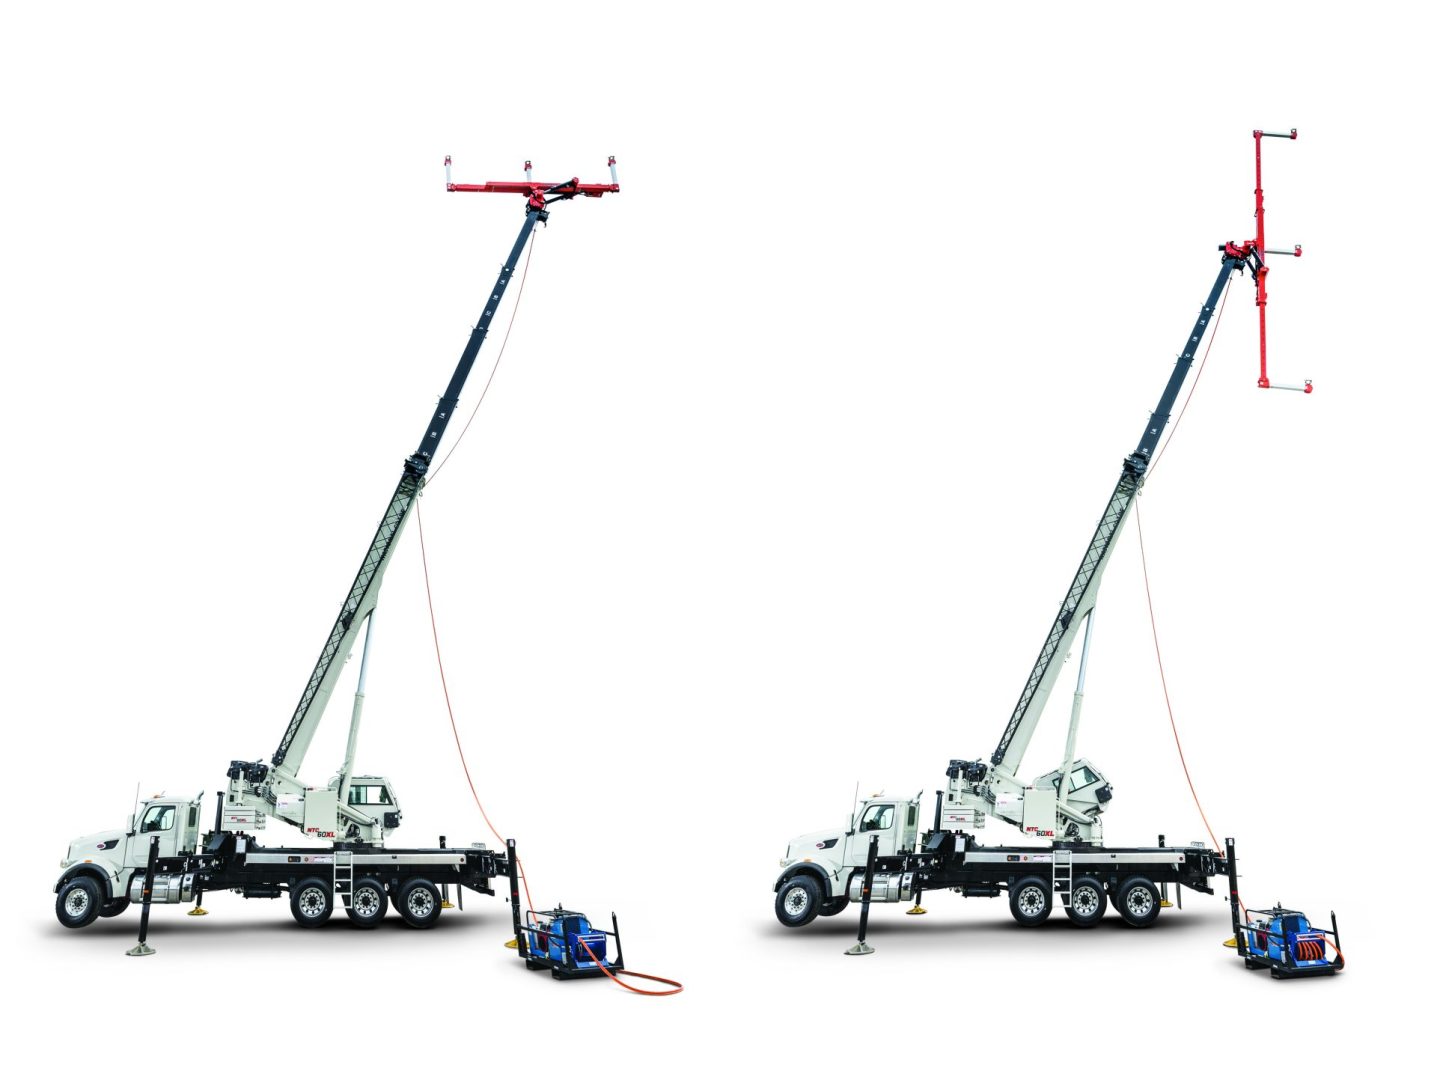 two National Crane modesl equipped with lineWise line lifers